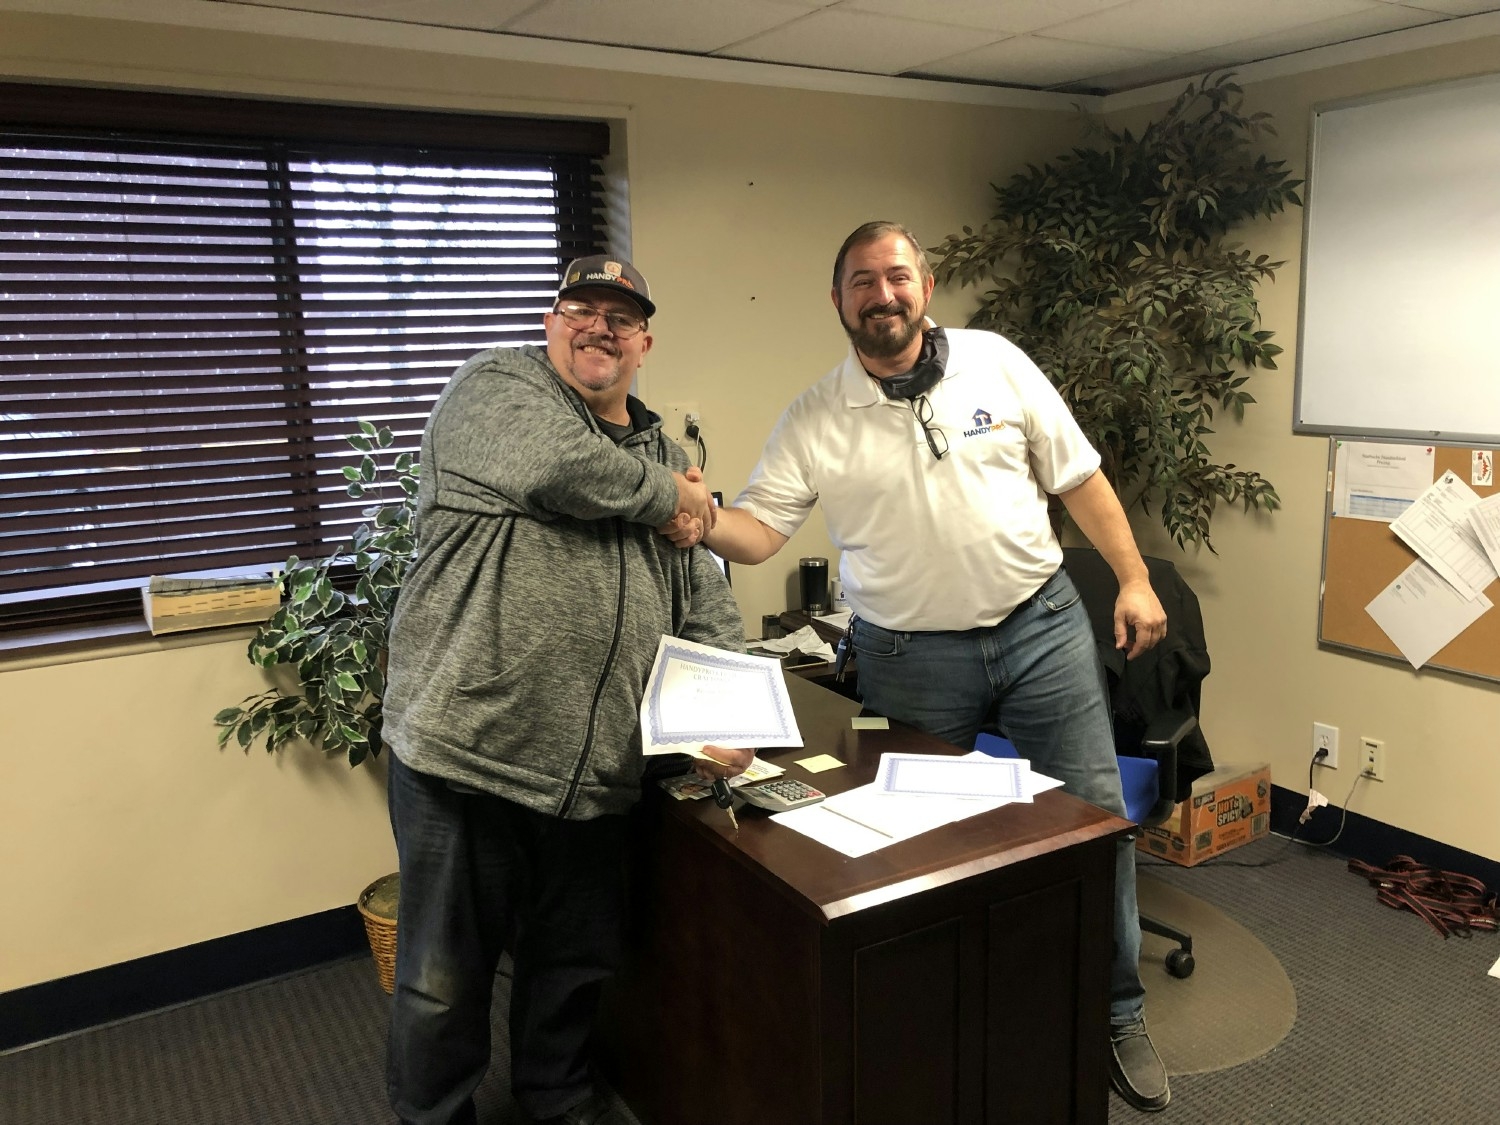 Handyman Russ A. Proudly receiving his HP Craftsmen Certification from MGR Joe K, which he recently passed Dec 2021. 